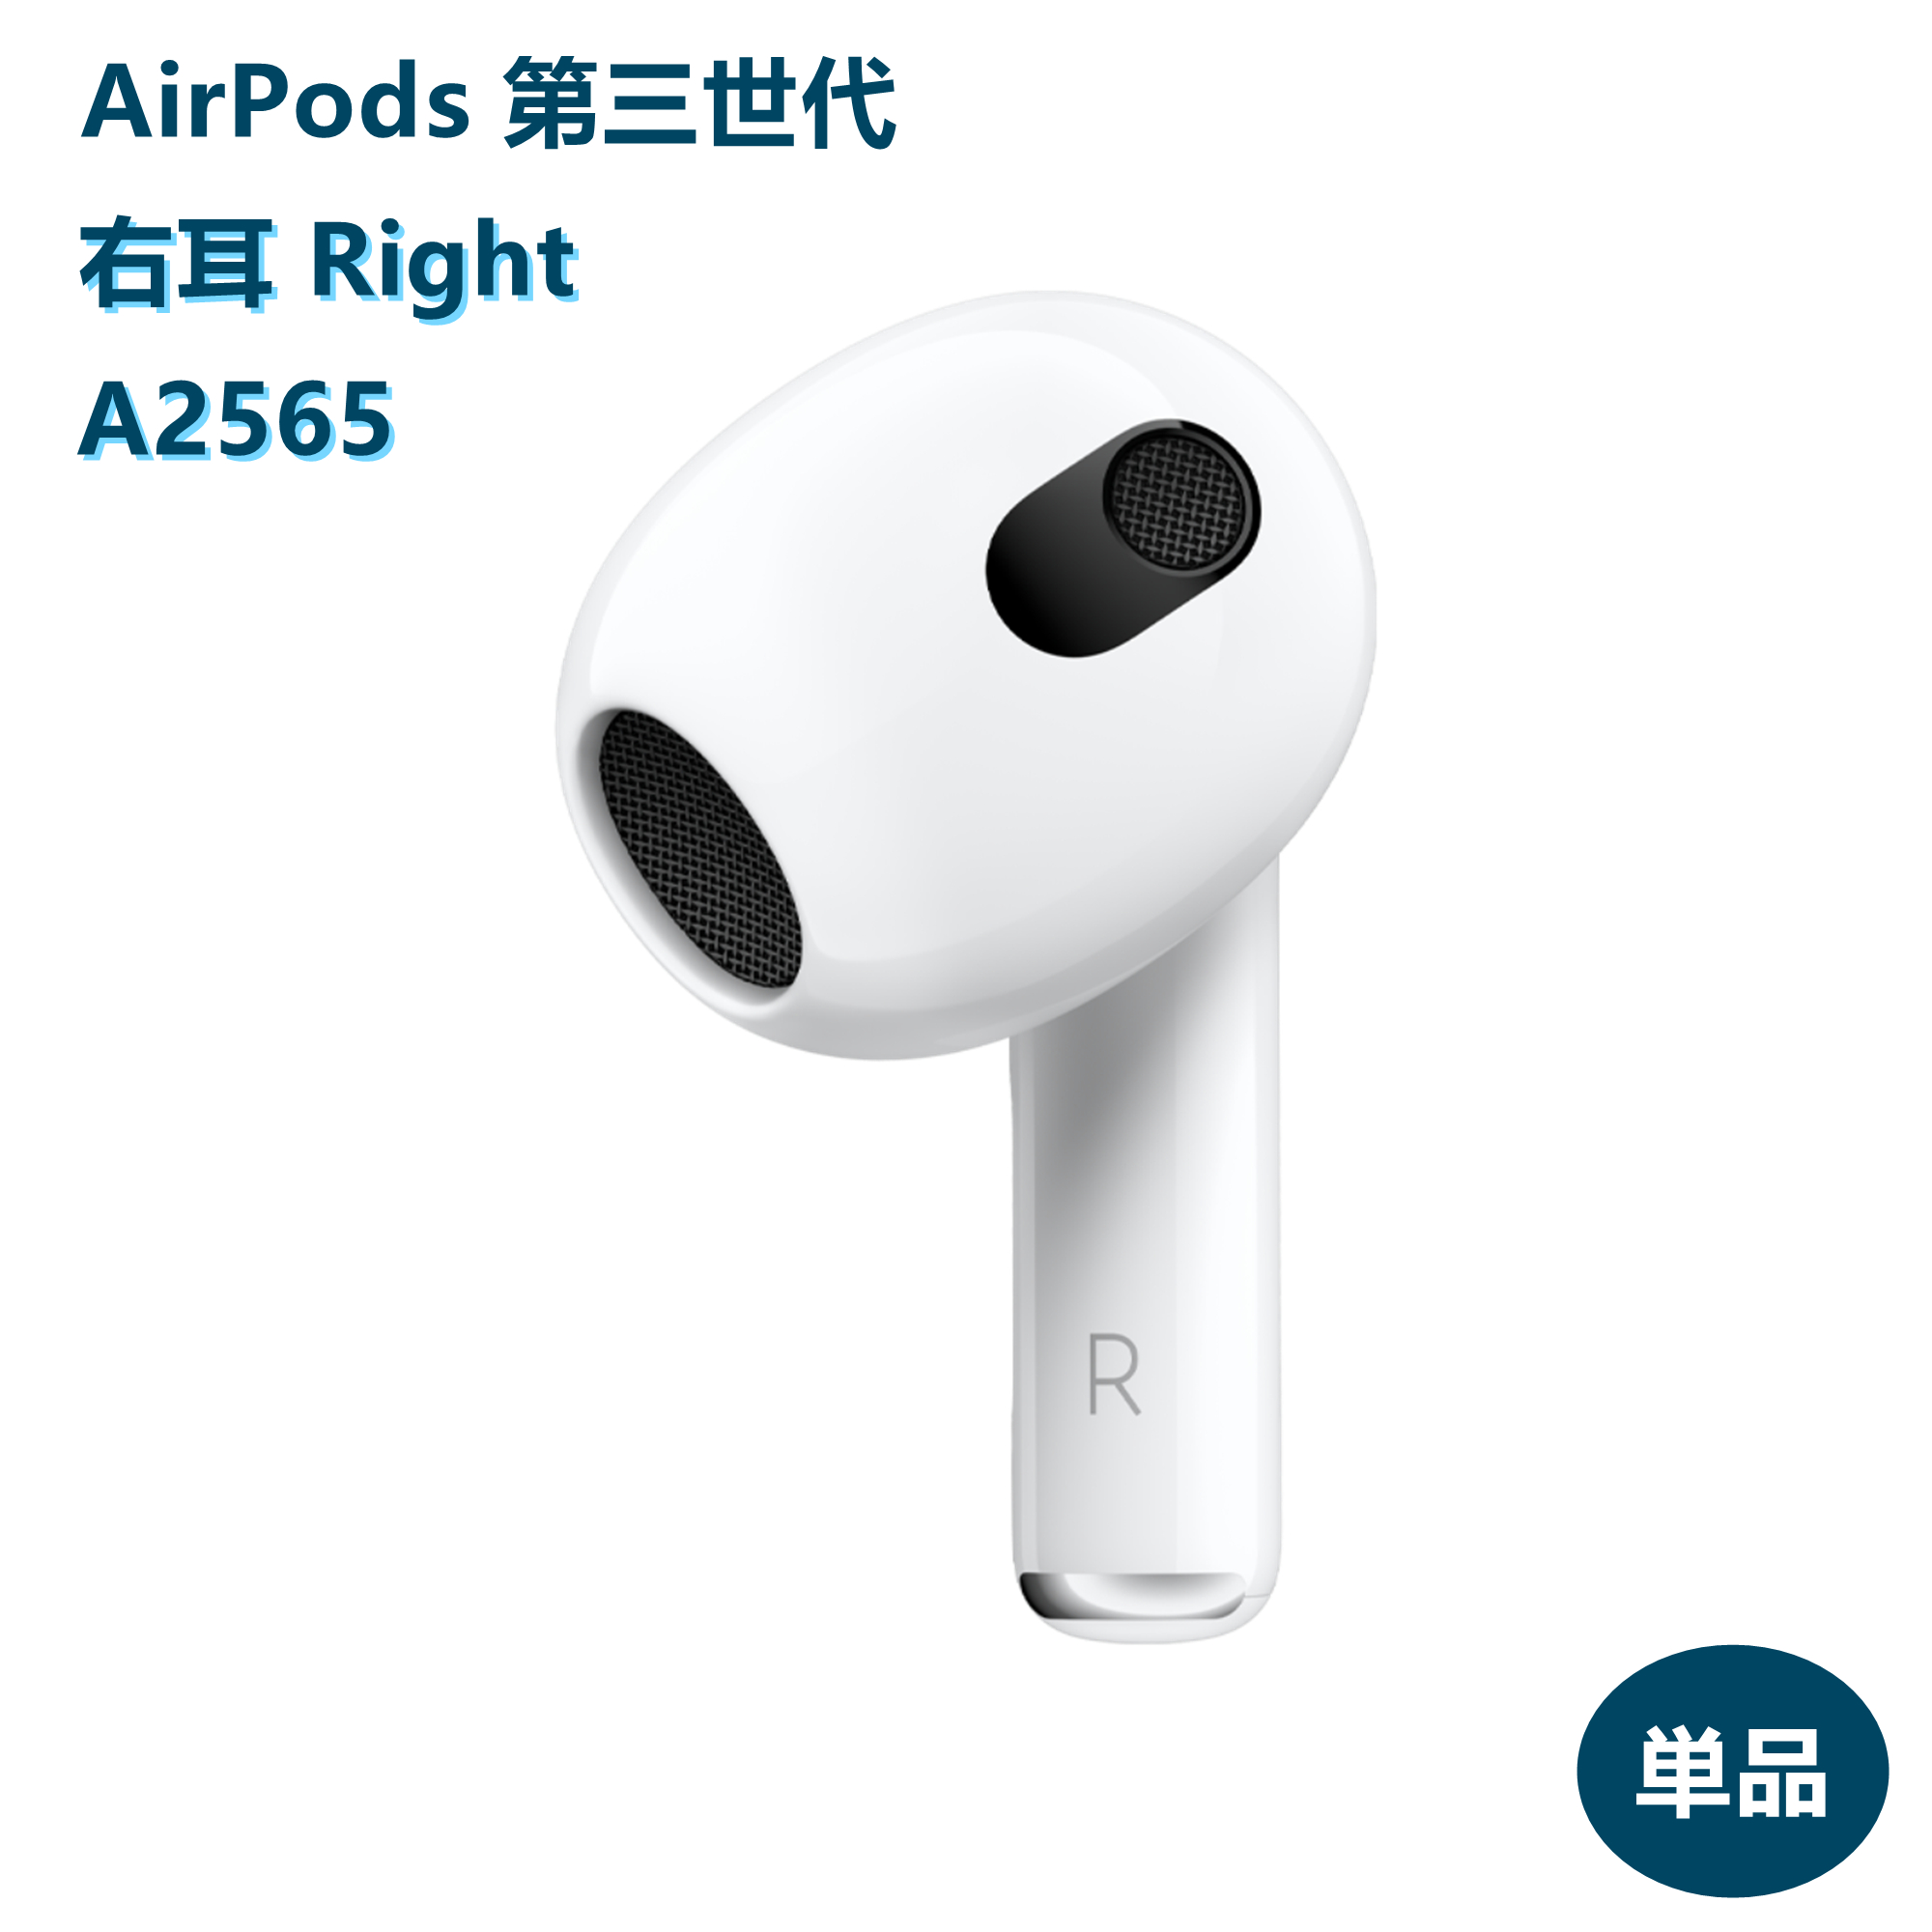 AirPods 第3世代 イヤホン 左耳 のみ 片耳 MME73J/A